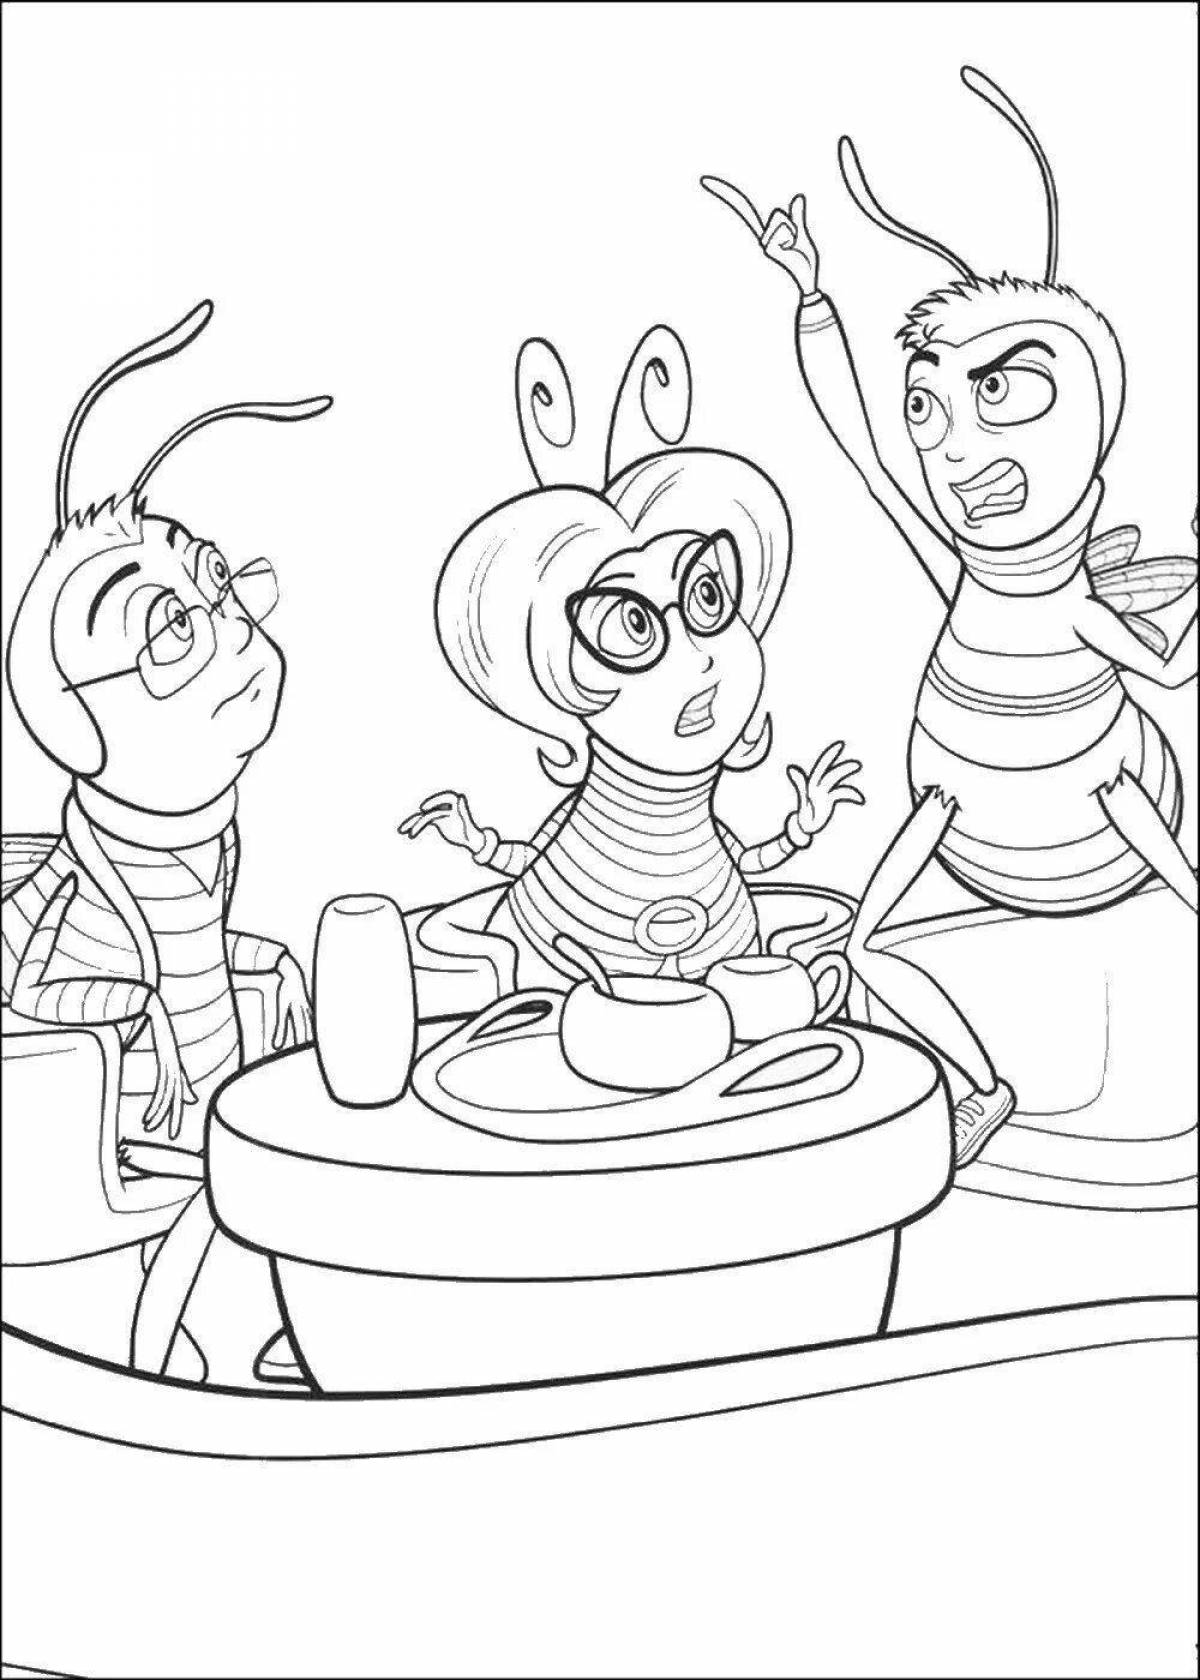 Charming honey plot coloring page